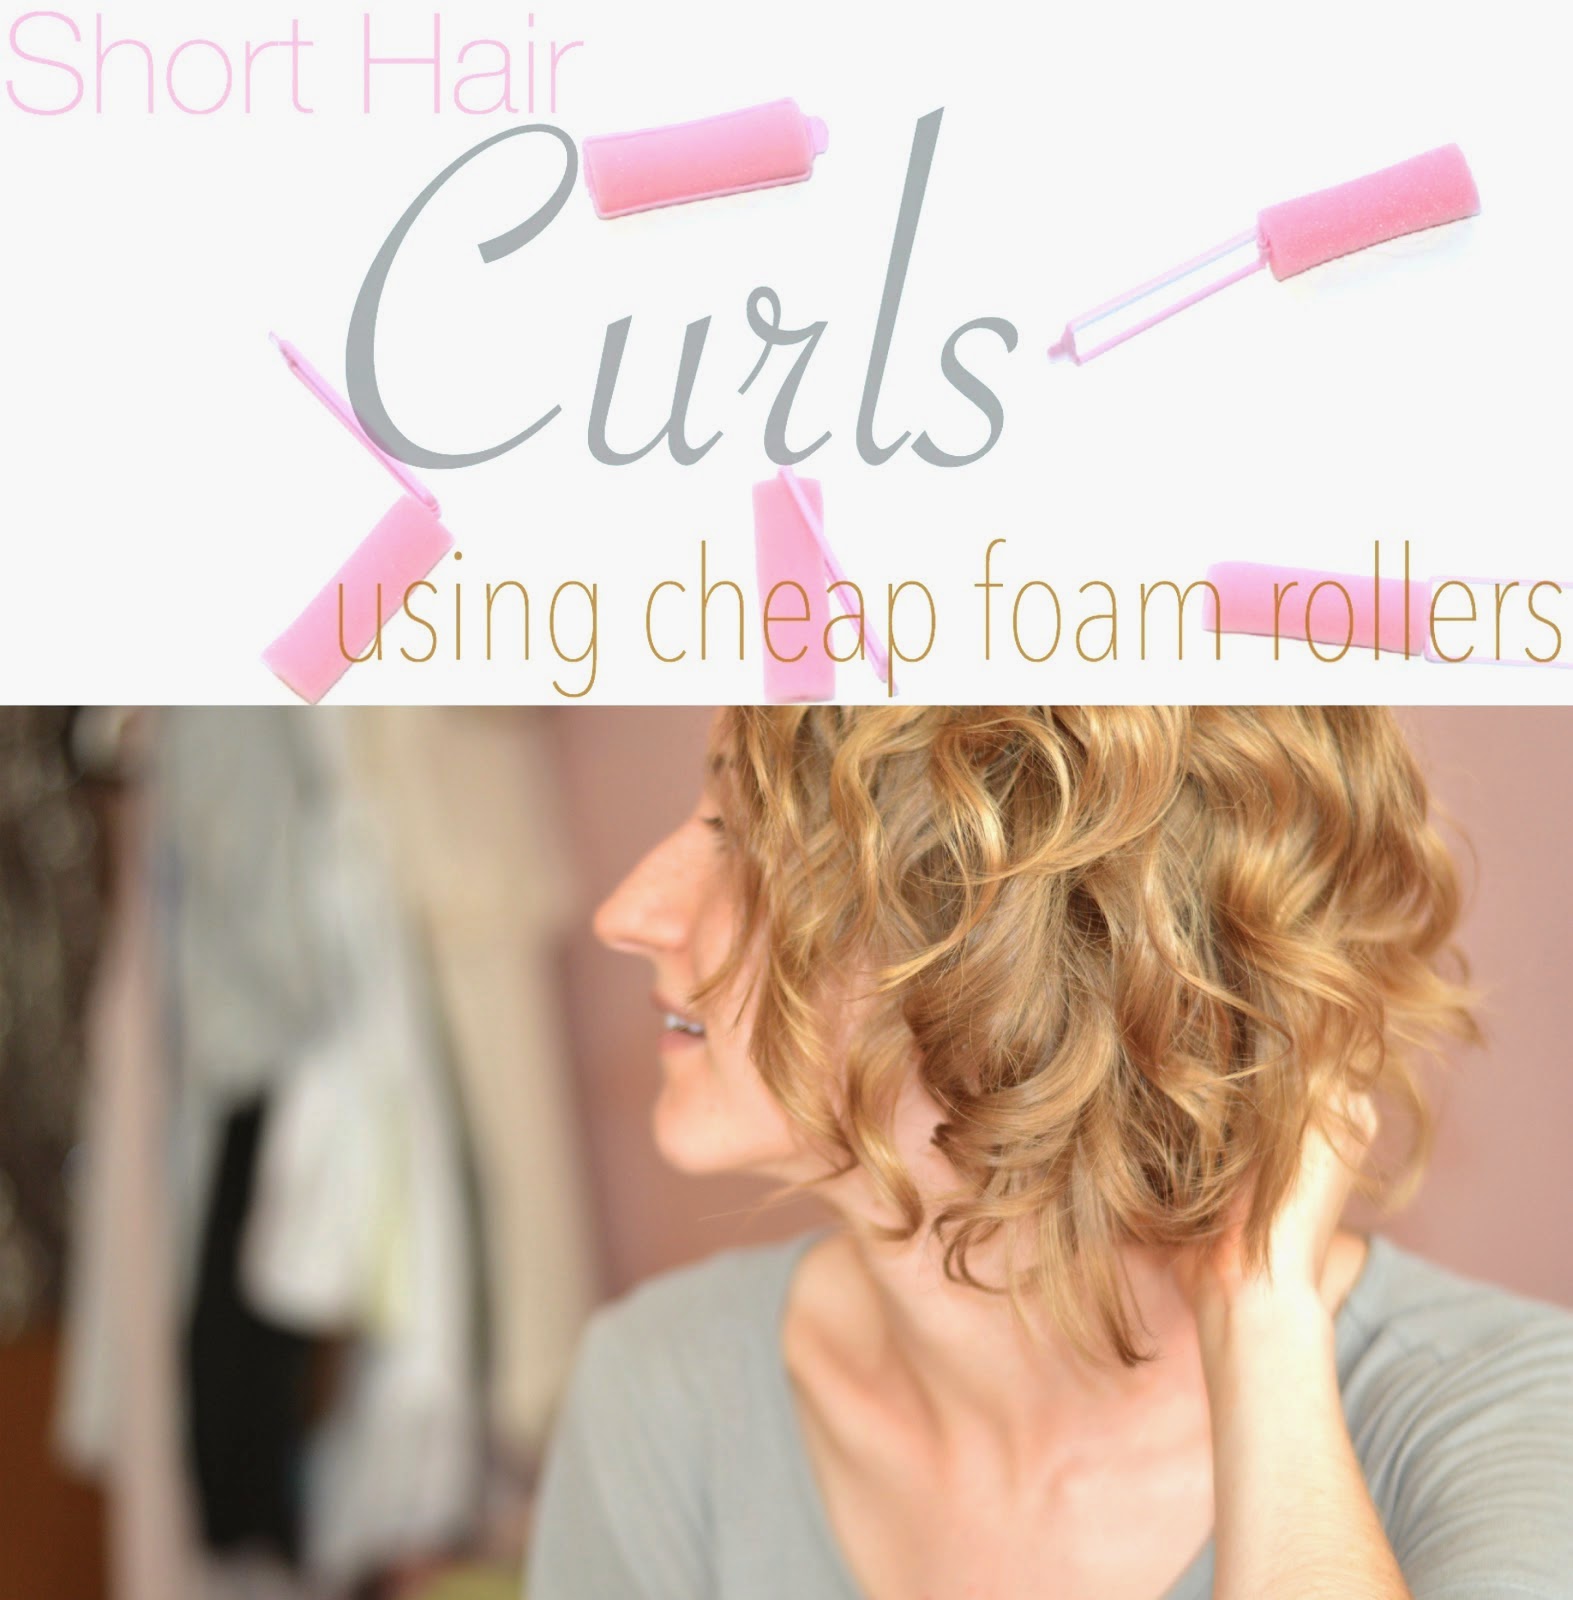 HowTo Curl Short  Hair  Using Cheap Foam Rollers  